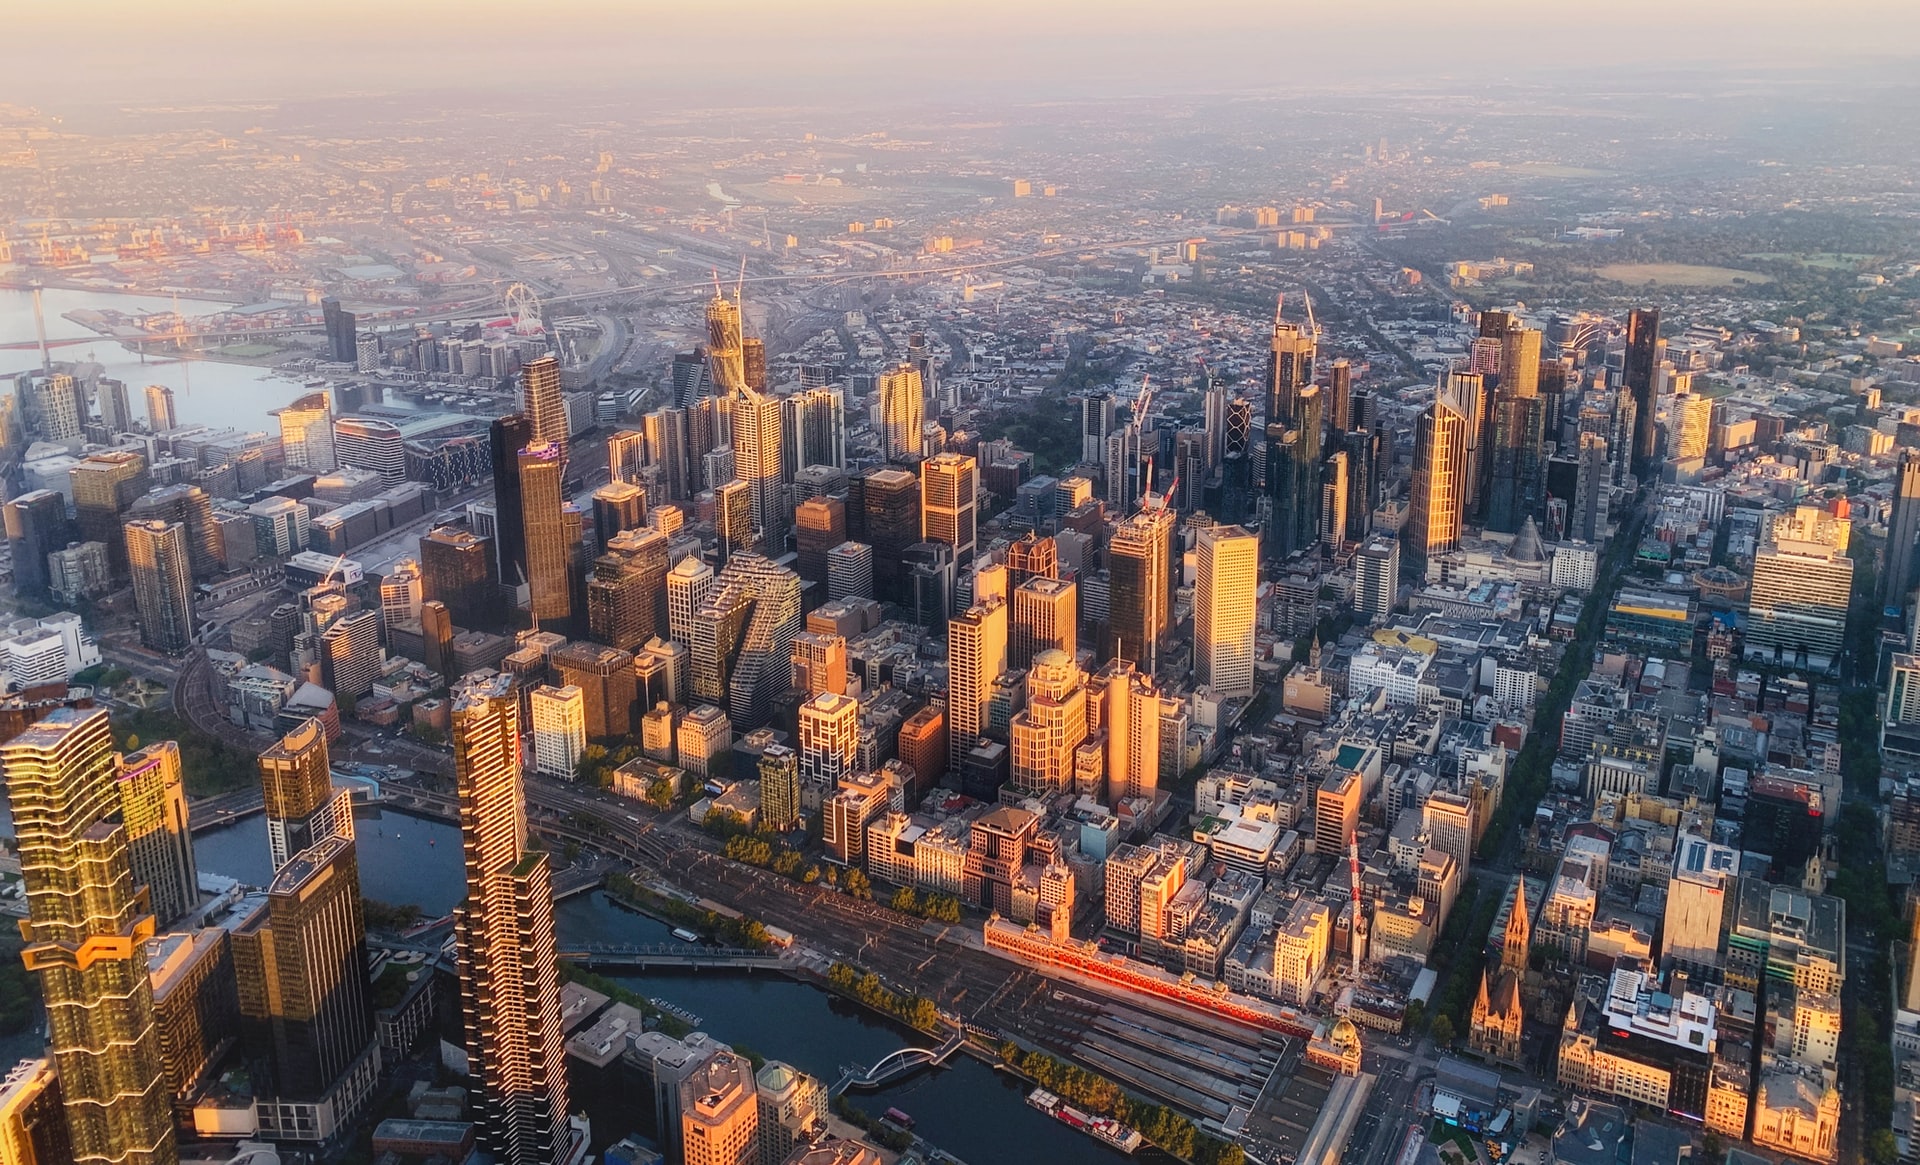 Sunset view over the Melbourne CBD